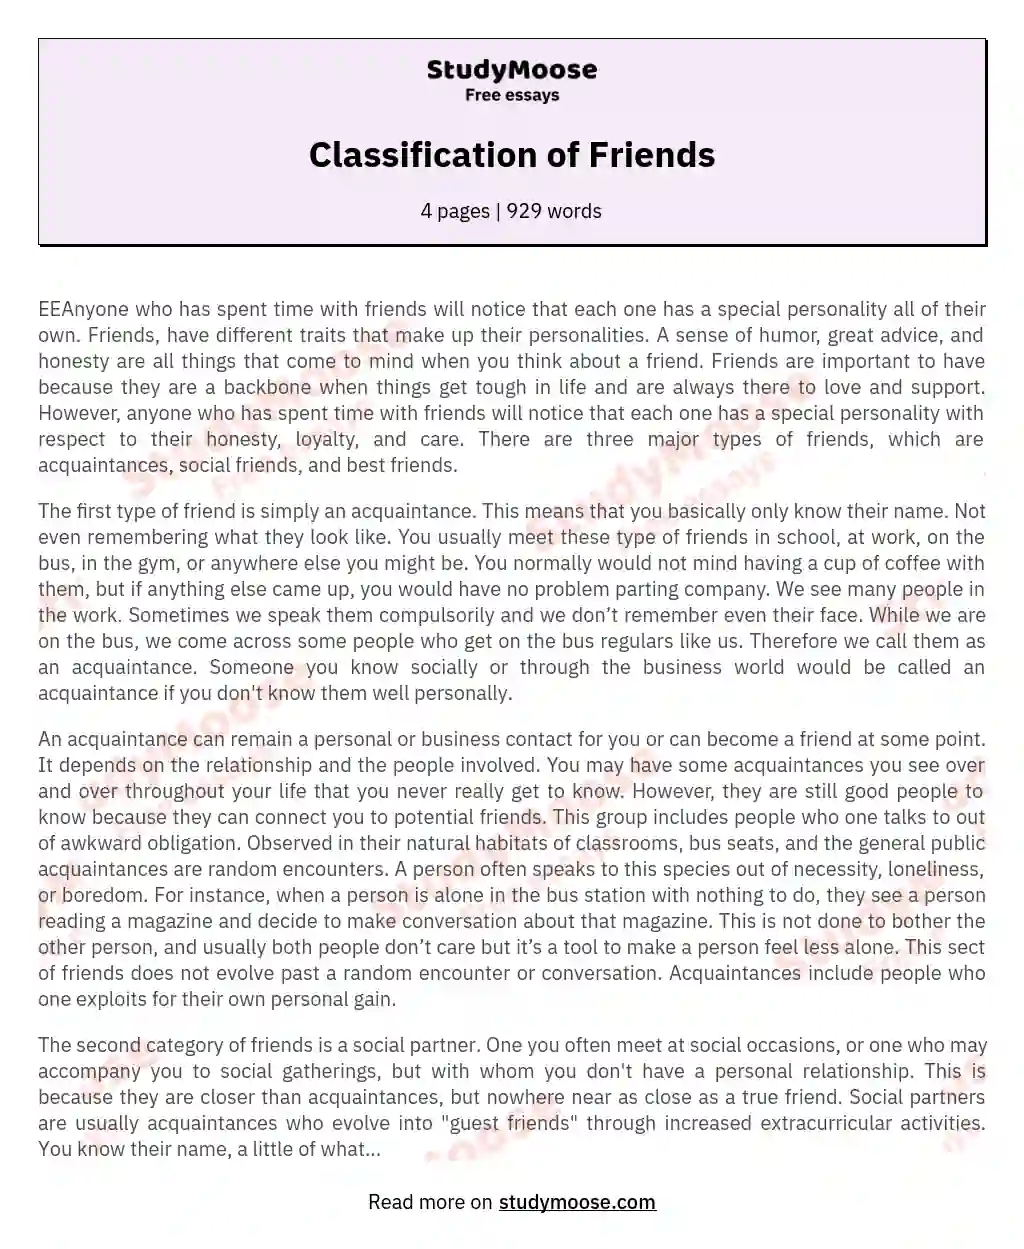 Classification of Friends essay